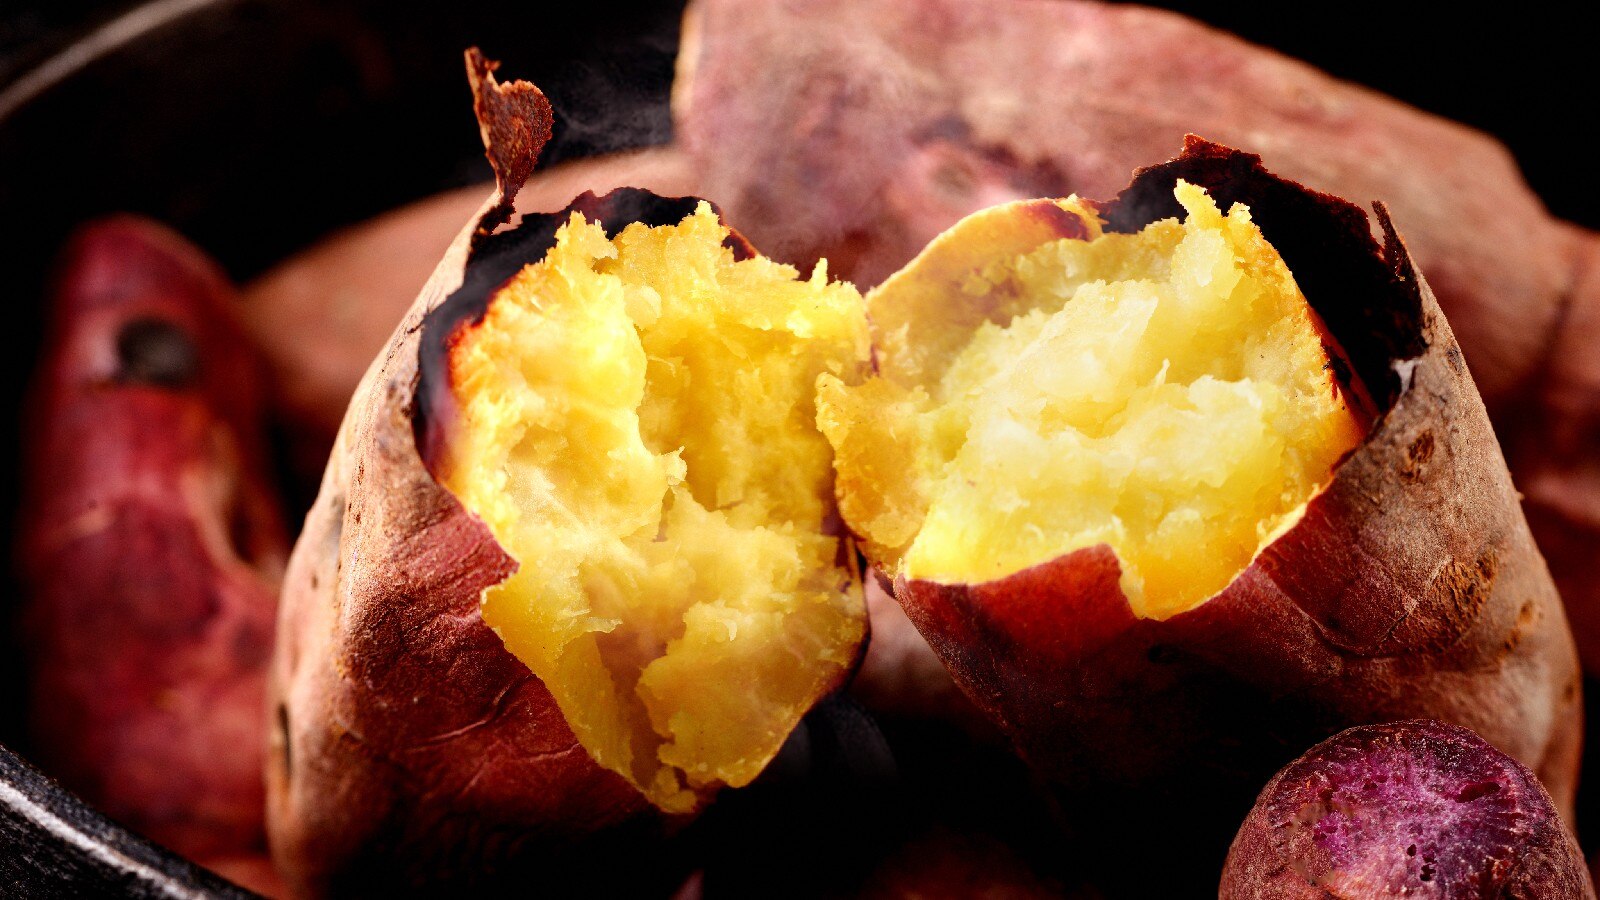 There is a sweet potato to say, but sugar can be controlled, know how to include it in the diet